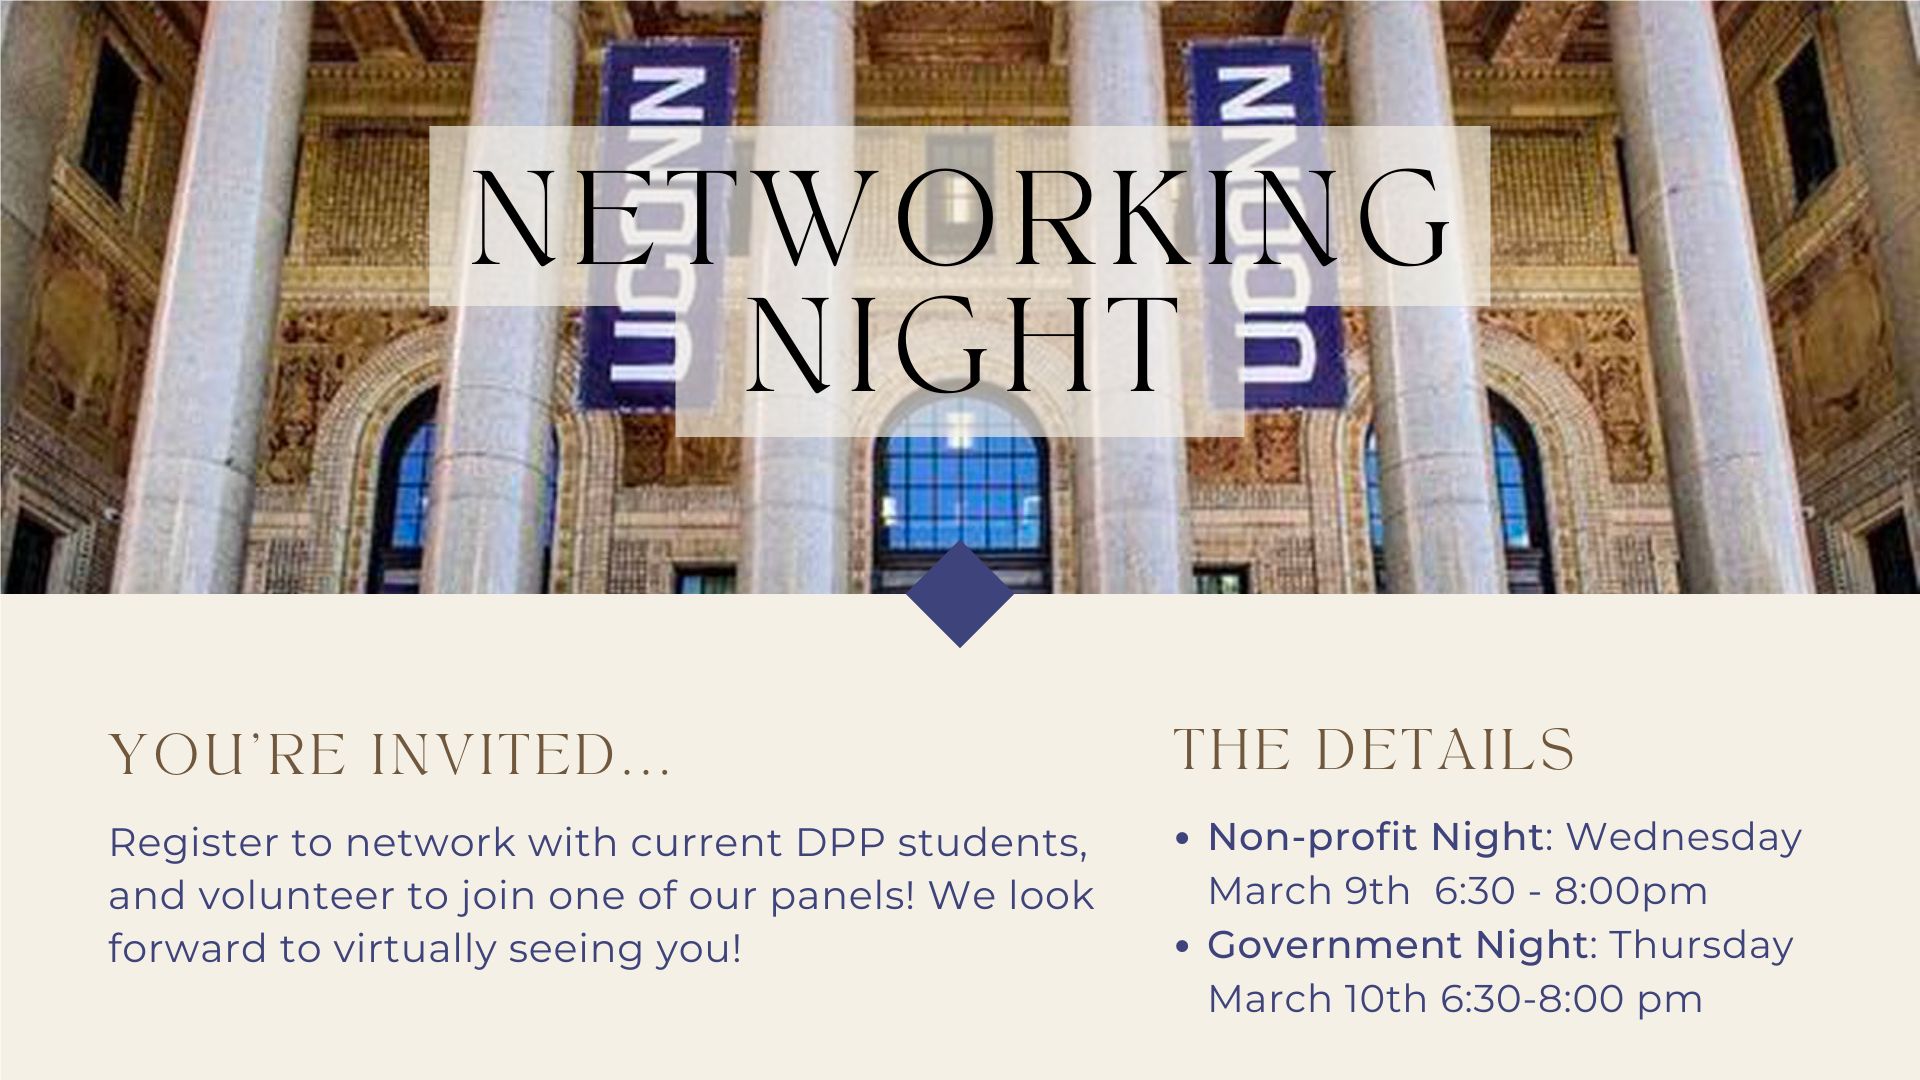 Networking Invitation to Nonprofit and Government Nights